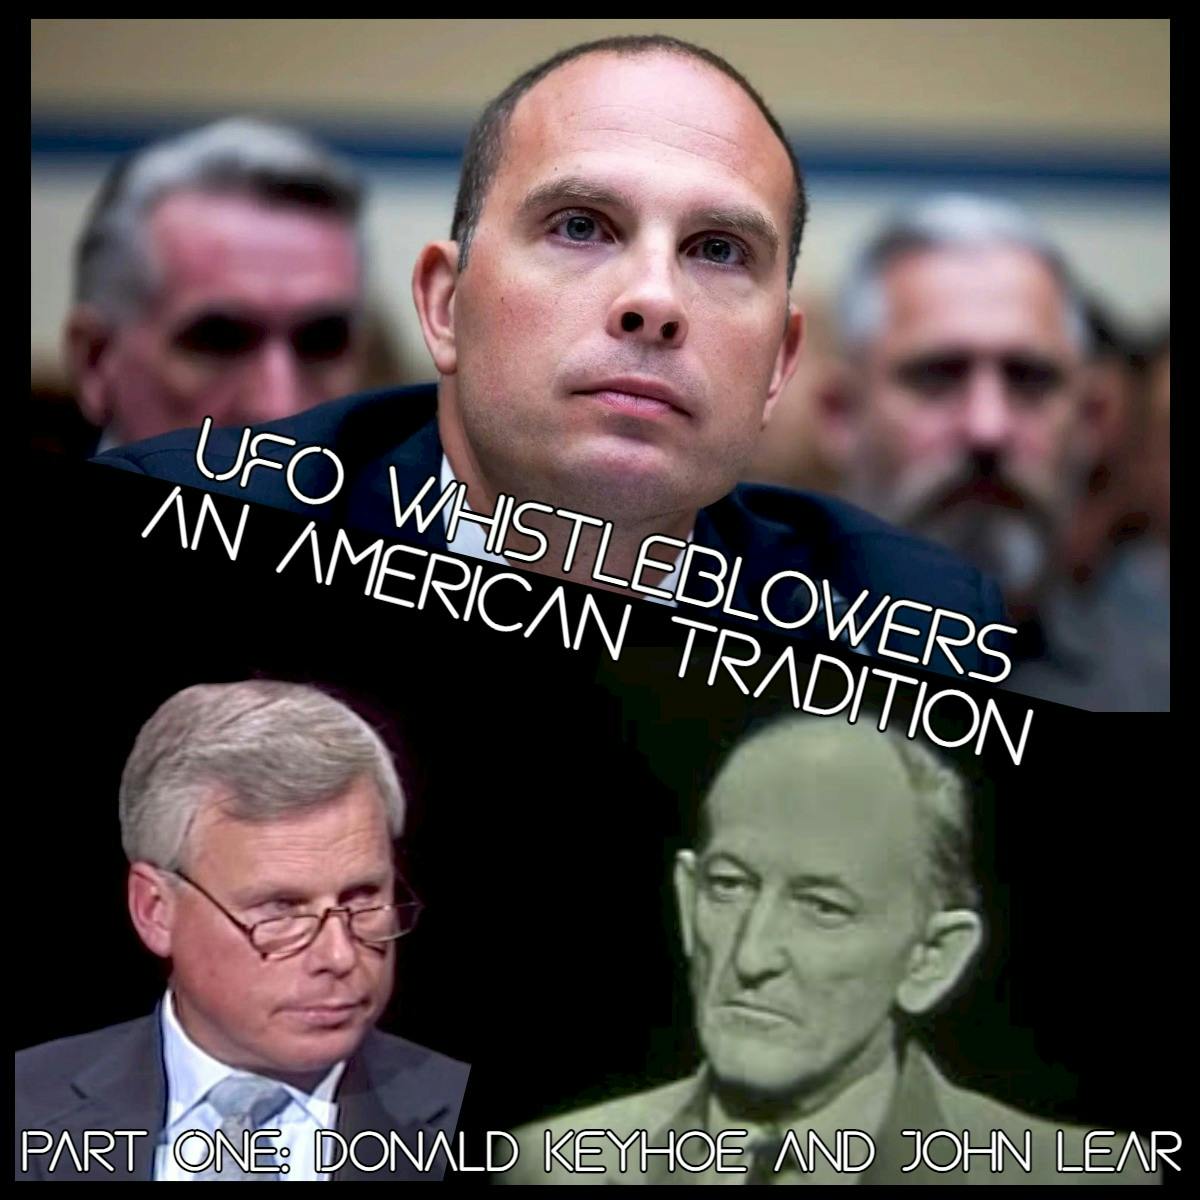 UFO Whistleblowers: An American Tradition, Part One - Donald Keyhoe and John Lear